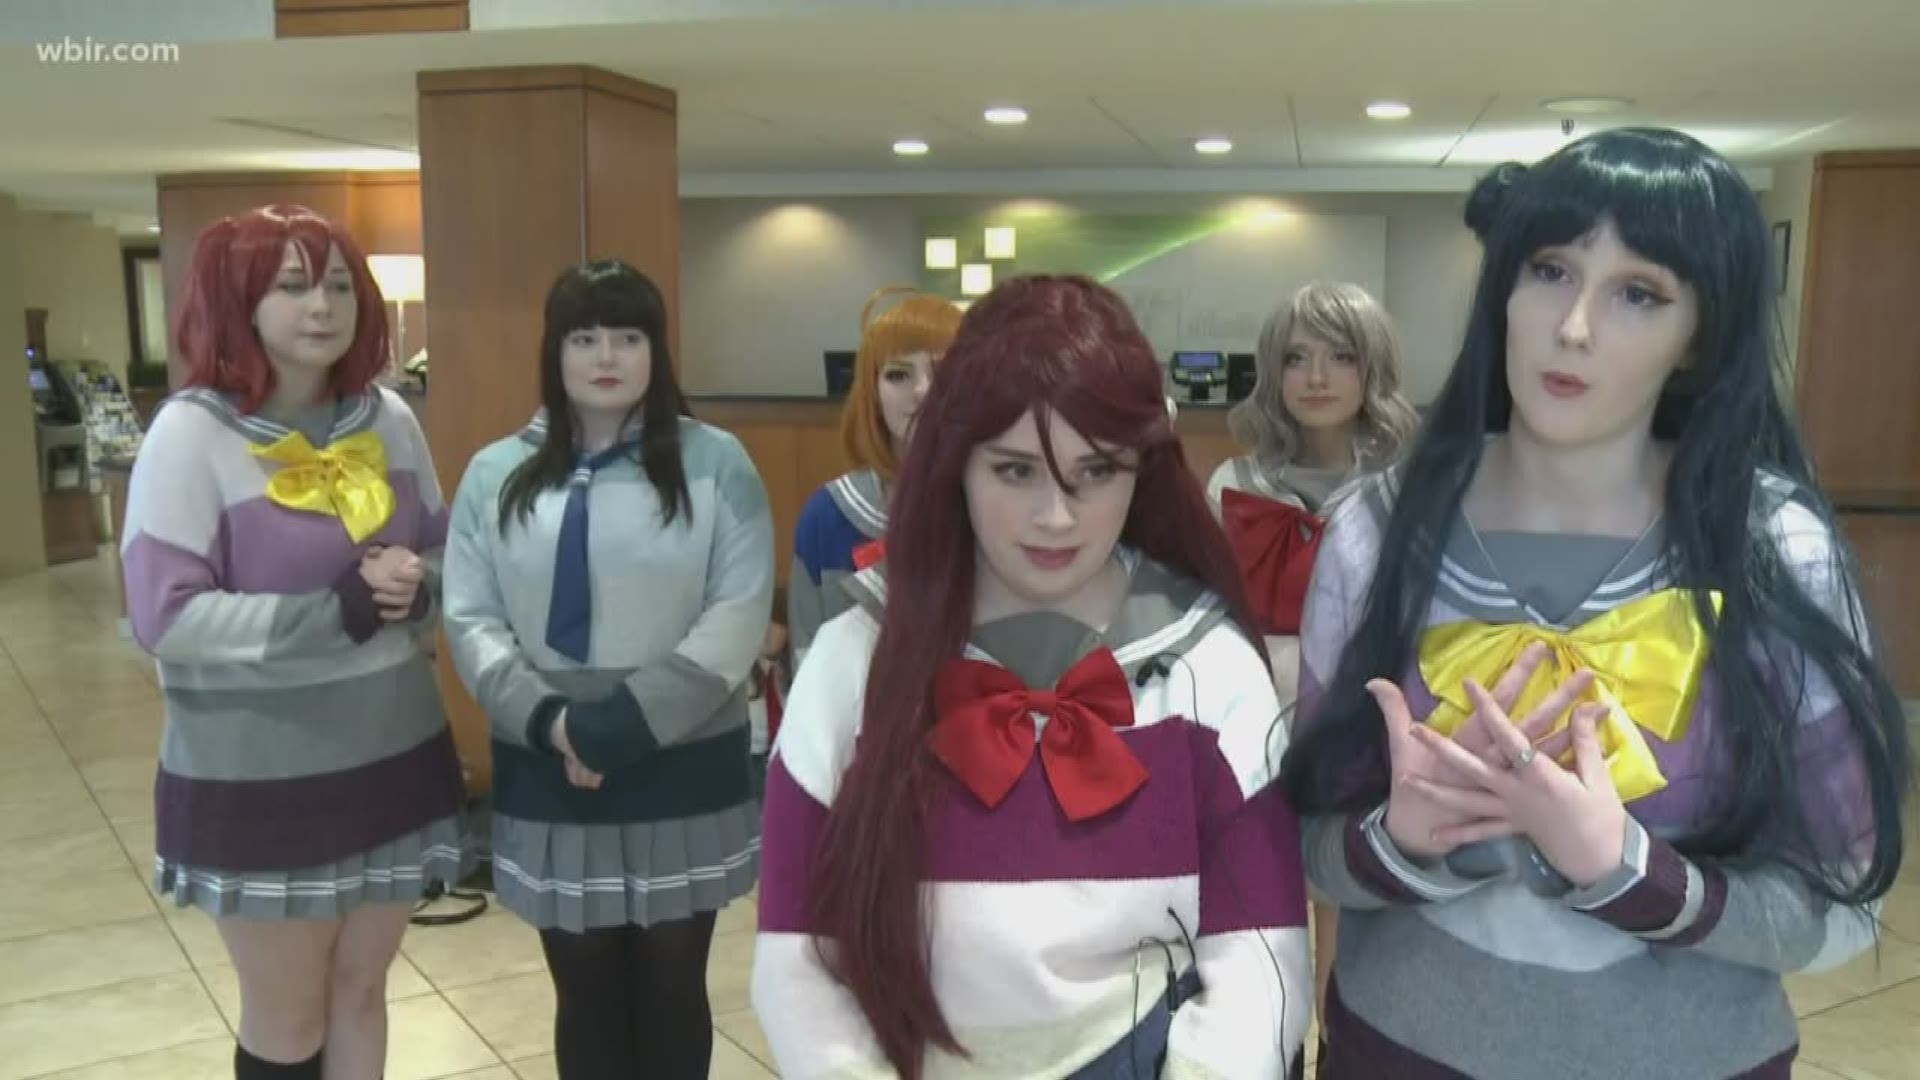 Anime fans gather in Knoxville for AnimeDay convention